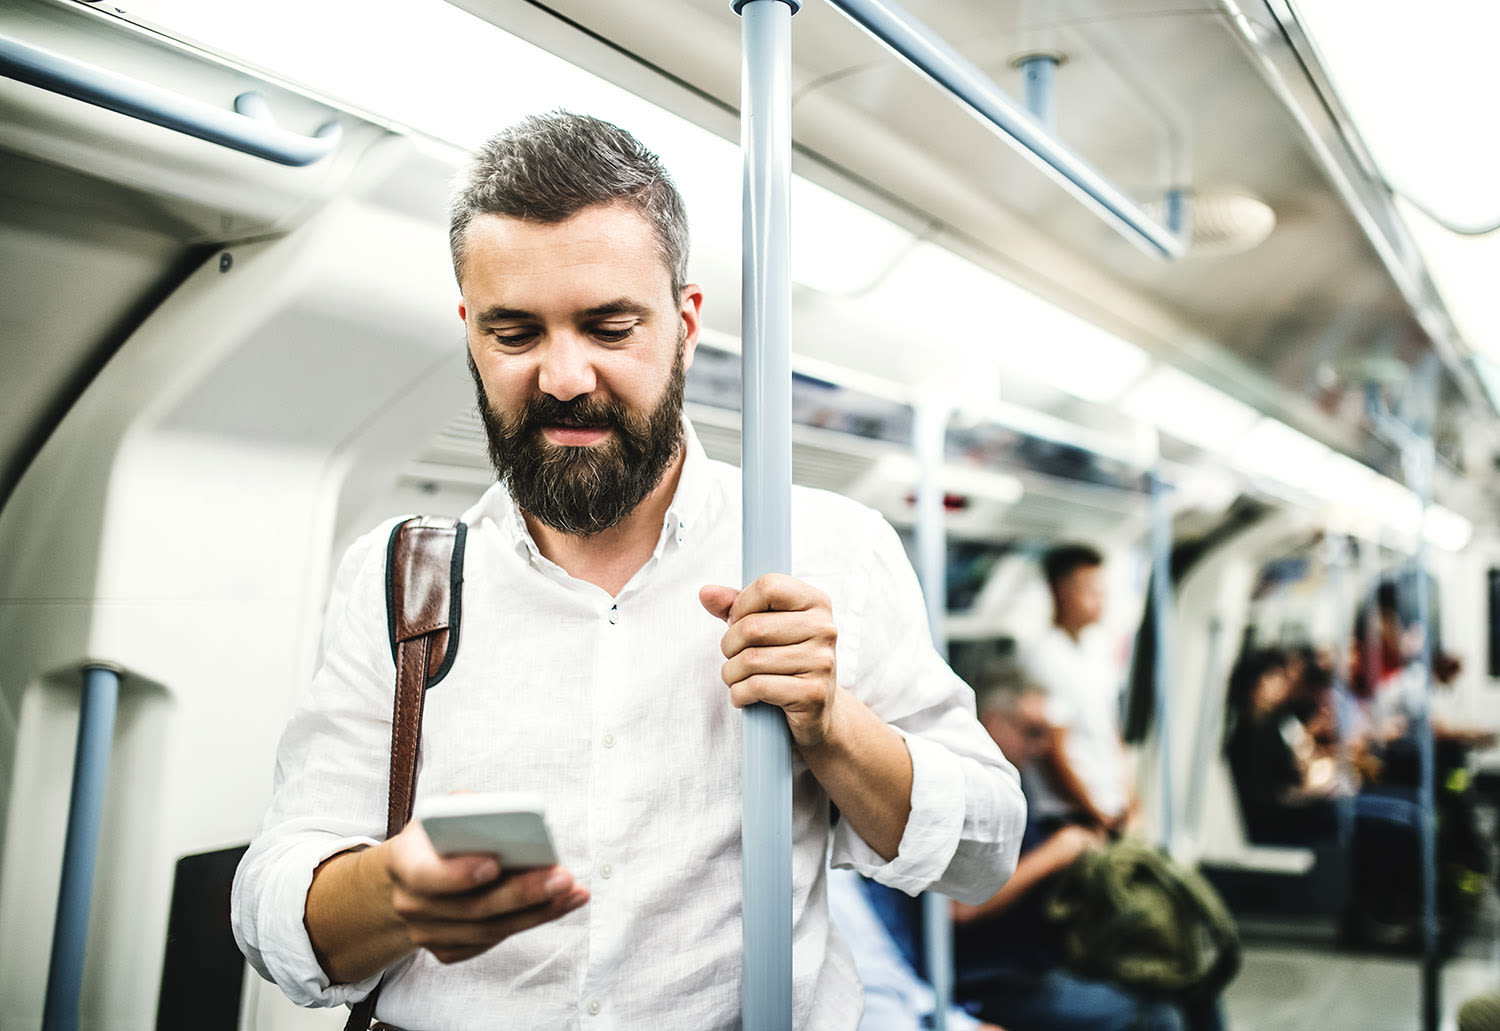 A man using his phone on the London Underground